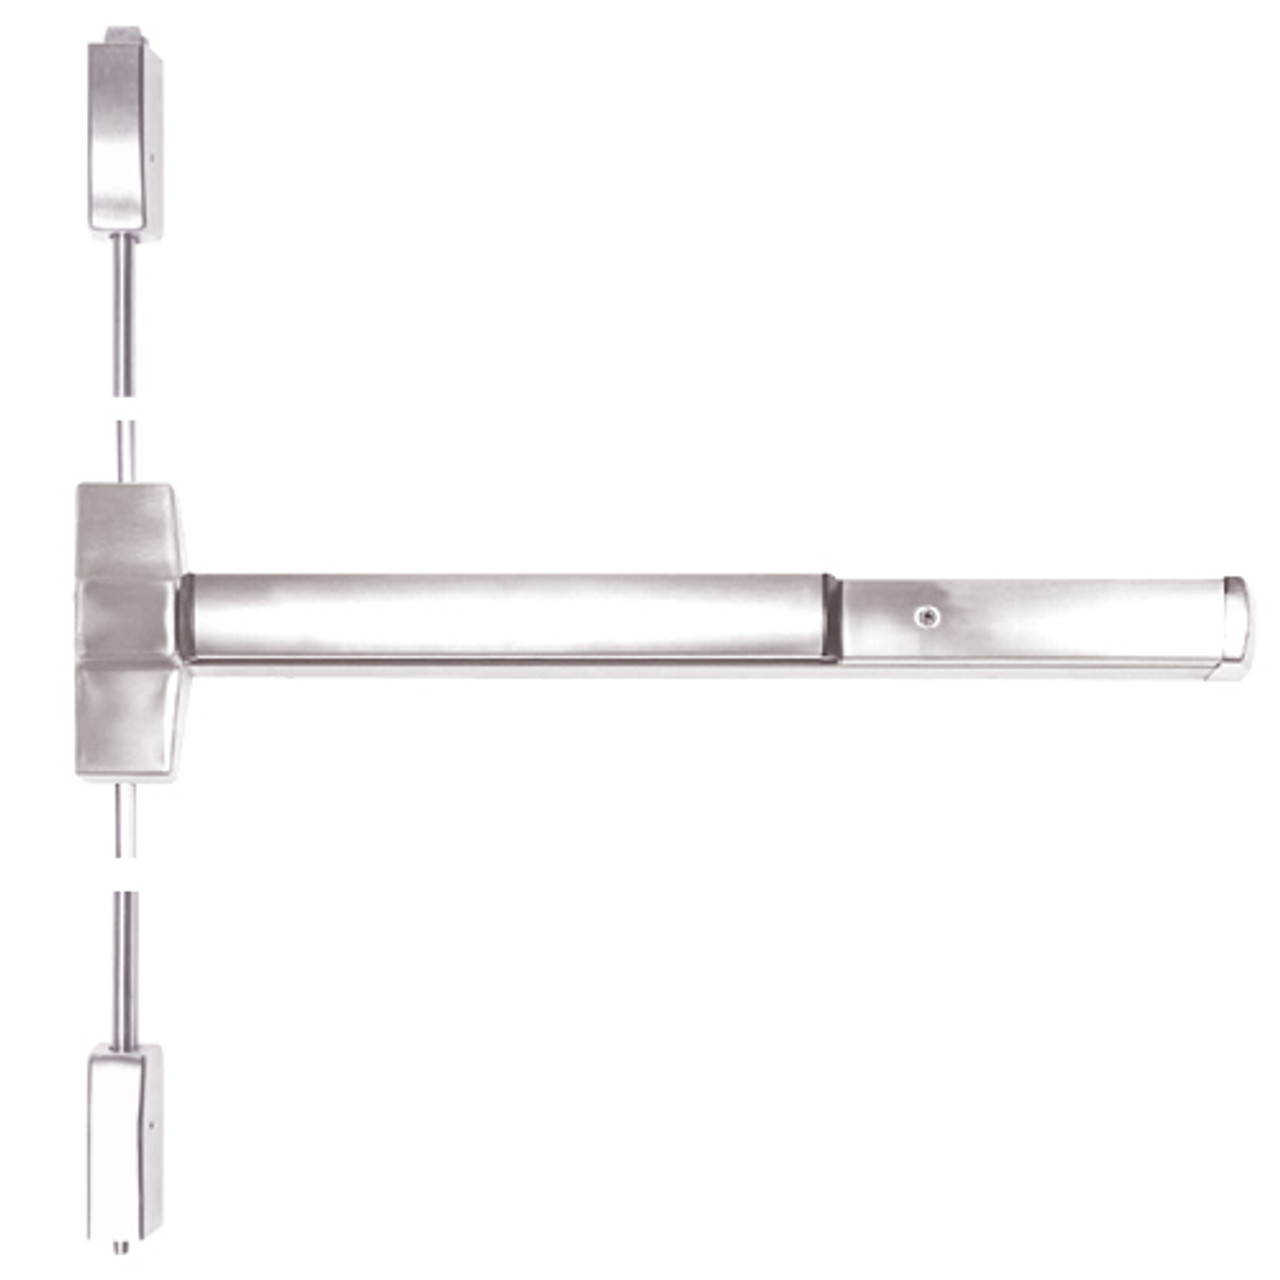 ED5470-629-W048 Corbin ED5400 Series Non Fire Rated Vertical Rod Exit Device in Bright Stainless Steel Finish